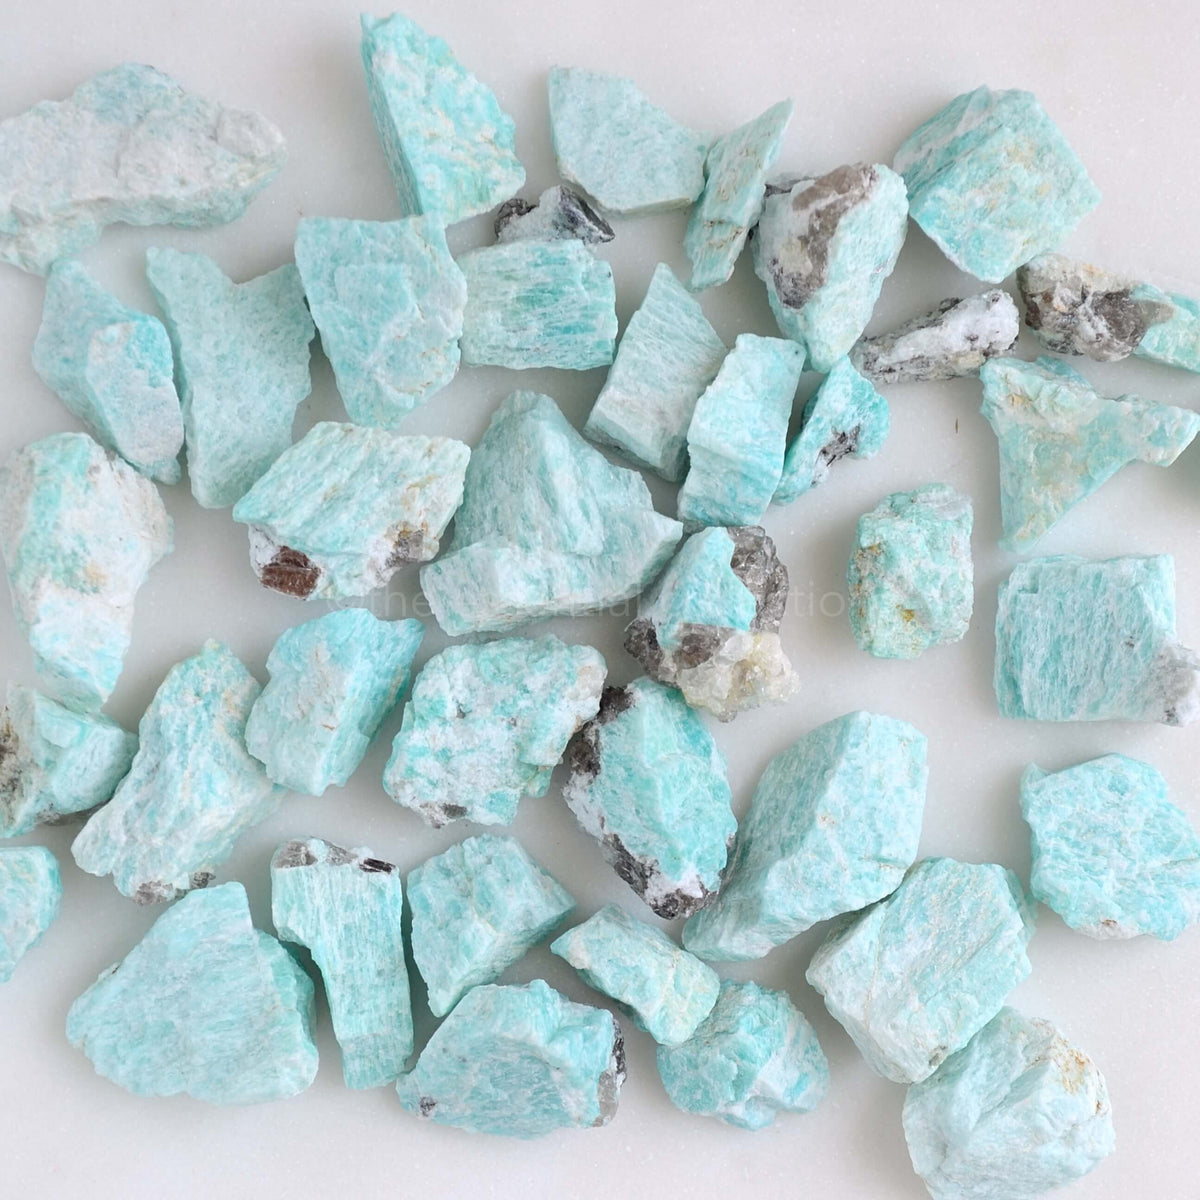 raw amazonite crystals for candles